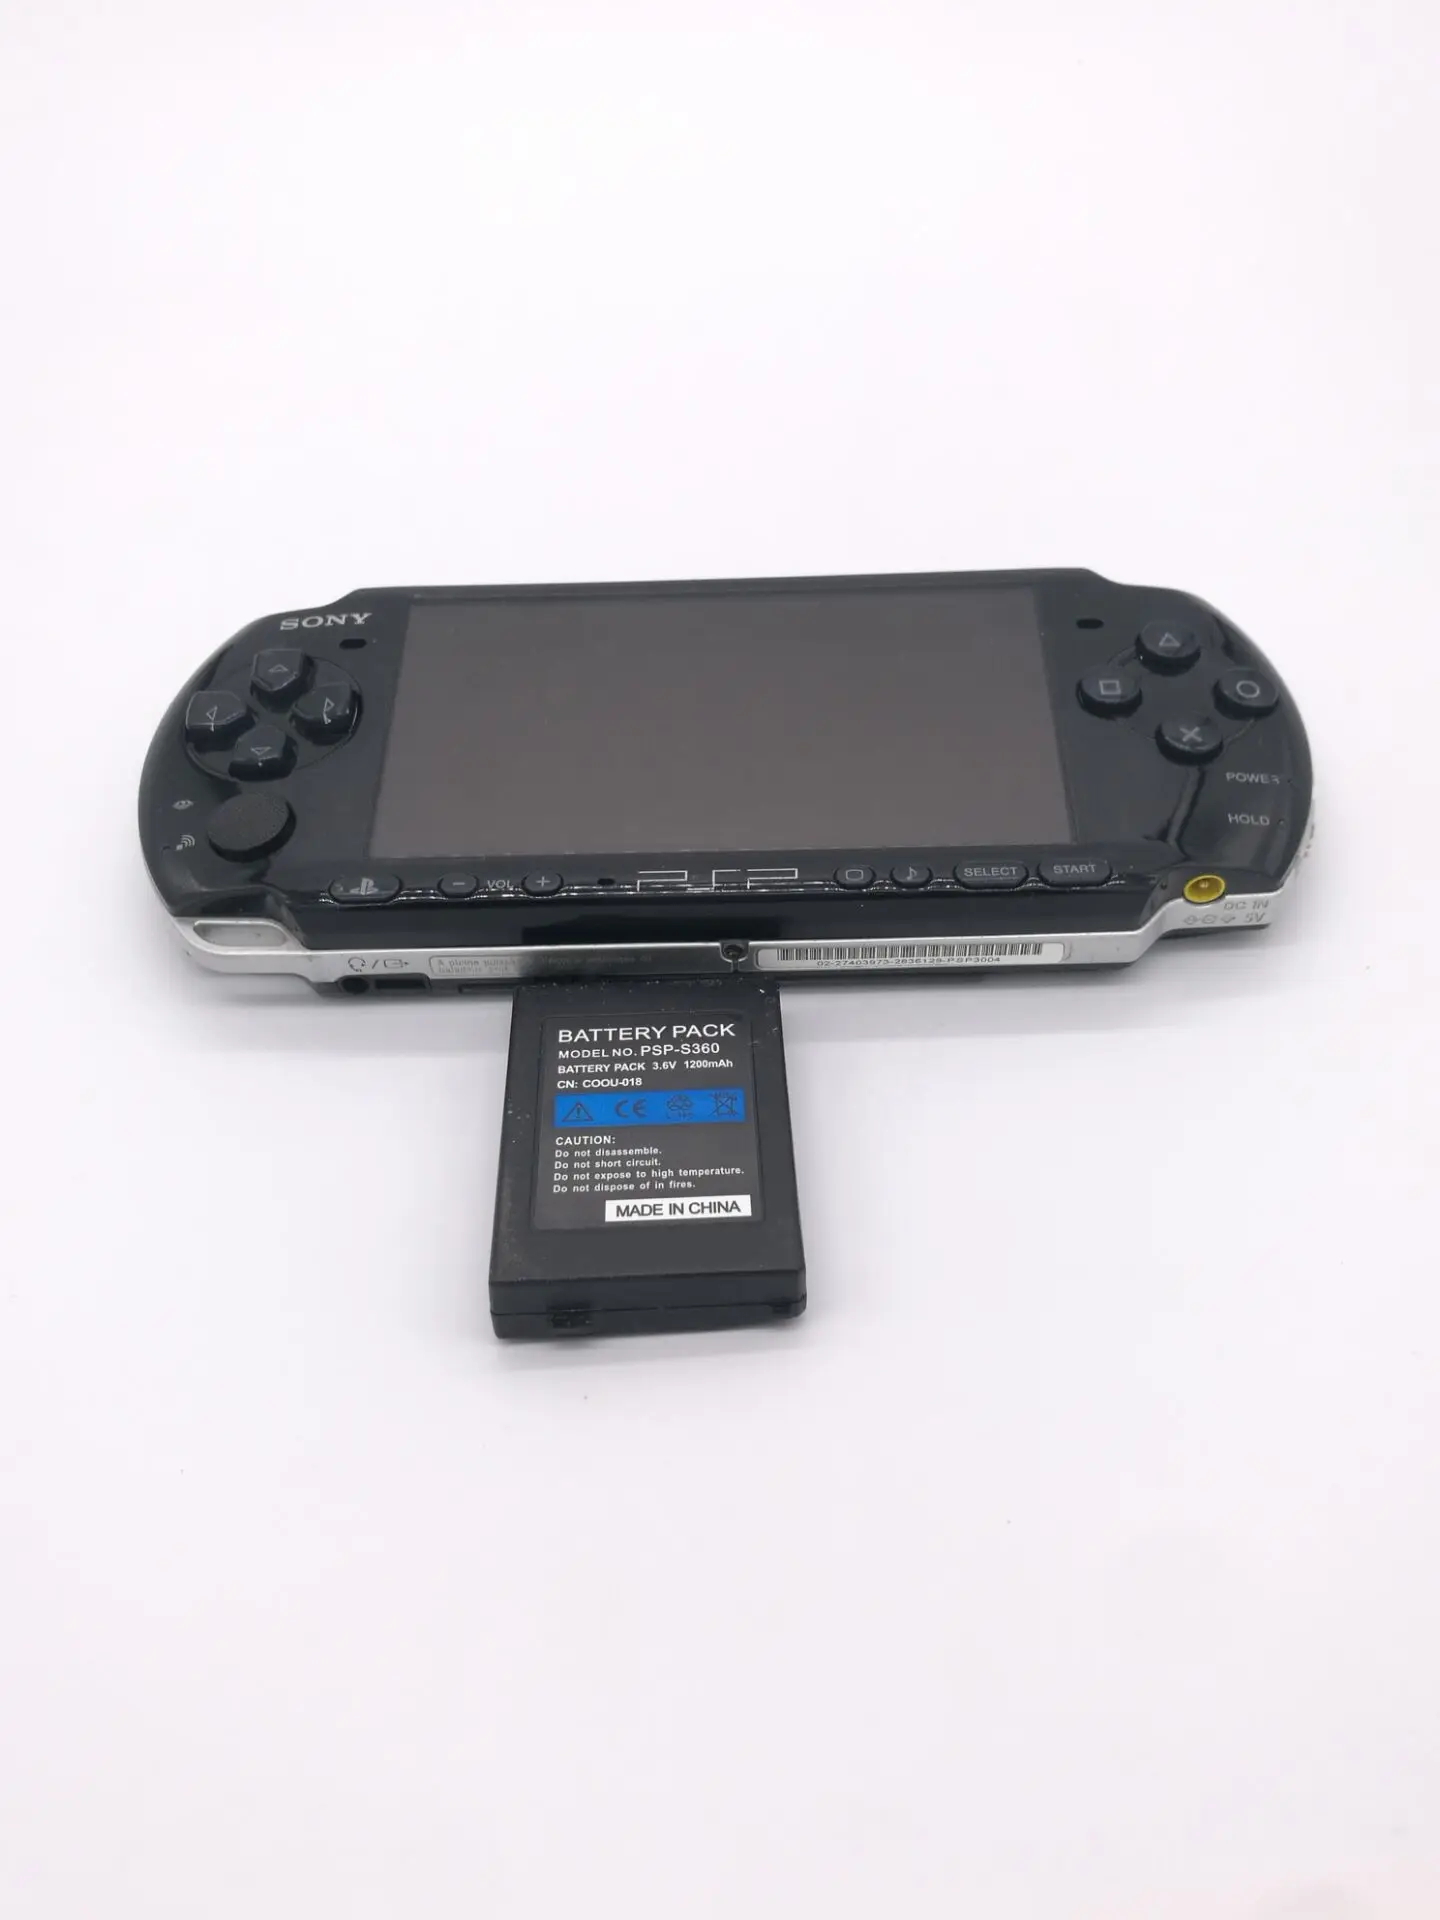 Rechargeable Battery Pack 3600mah For Psp 2000/3000 Housing Battery - Buy Battery  Pack 3600mah For Psp 2000/3000,Battery Pack For Psp 2000/3000,Battery For Psp  2000/3000 Product on Alibaba.com